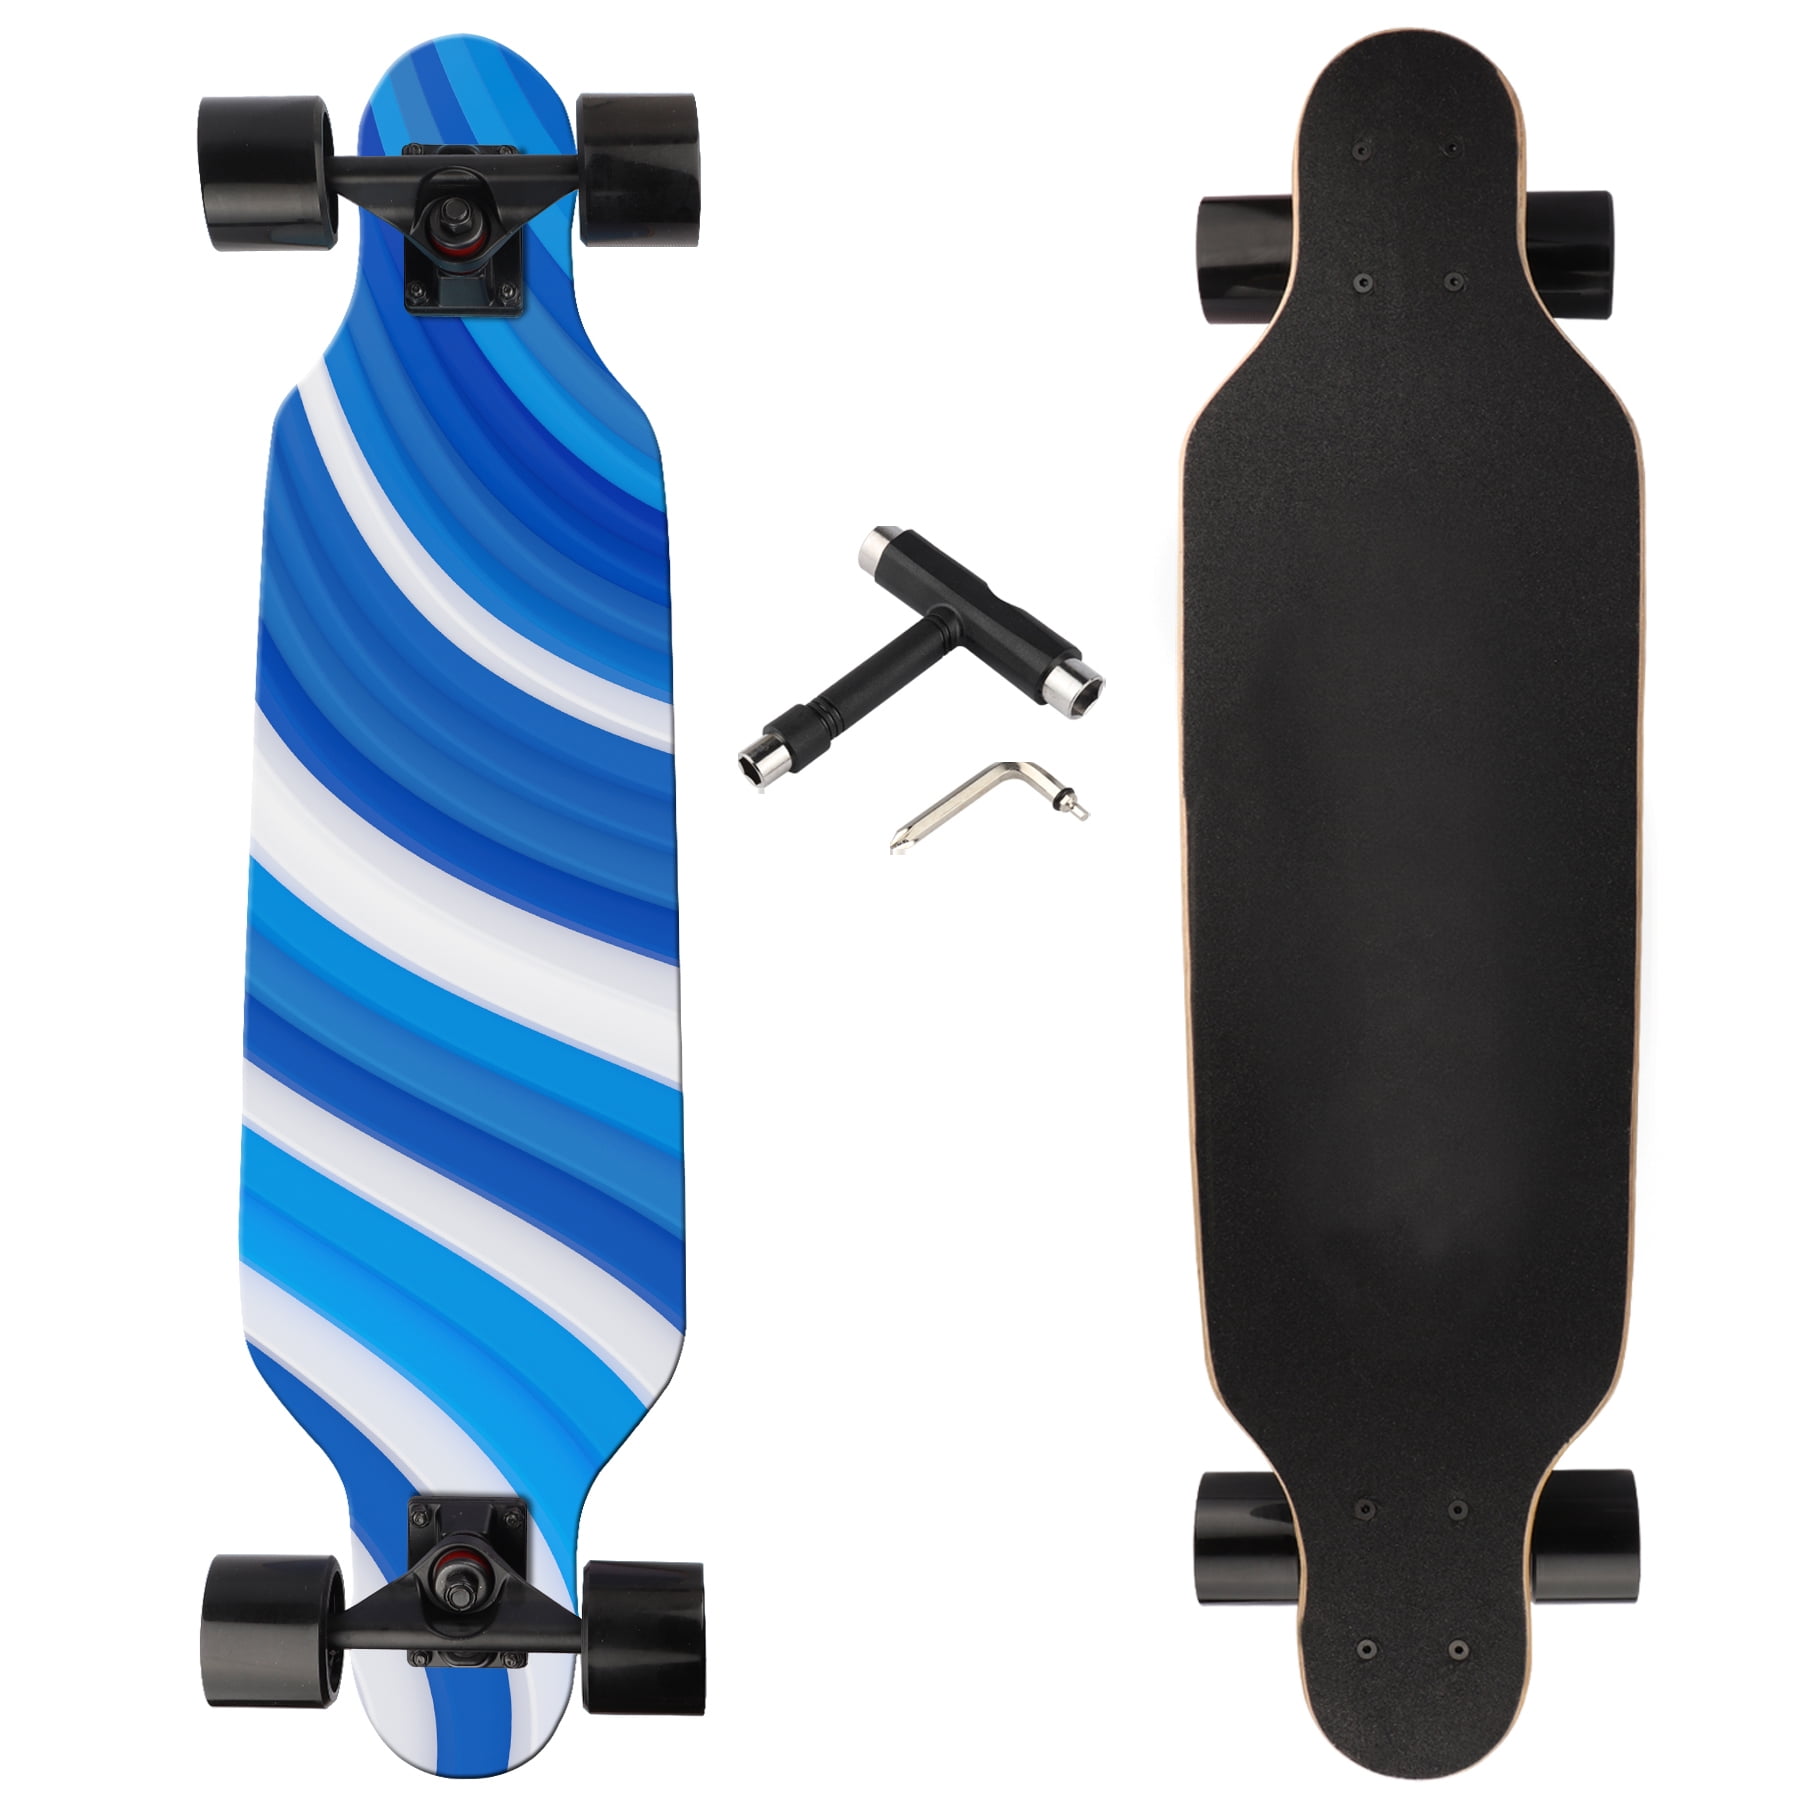 Carving Longboard Skateboard Complete 31 Inch Pro Small Longboard for Hybrid Freestyle Cruising and Downhill with All-in-one T-Tool